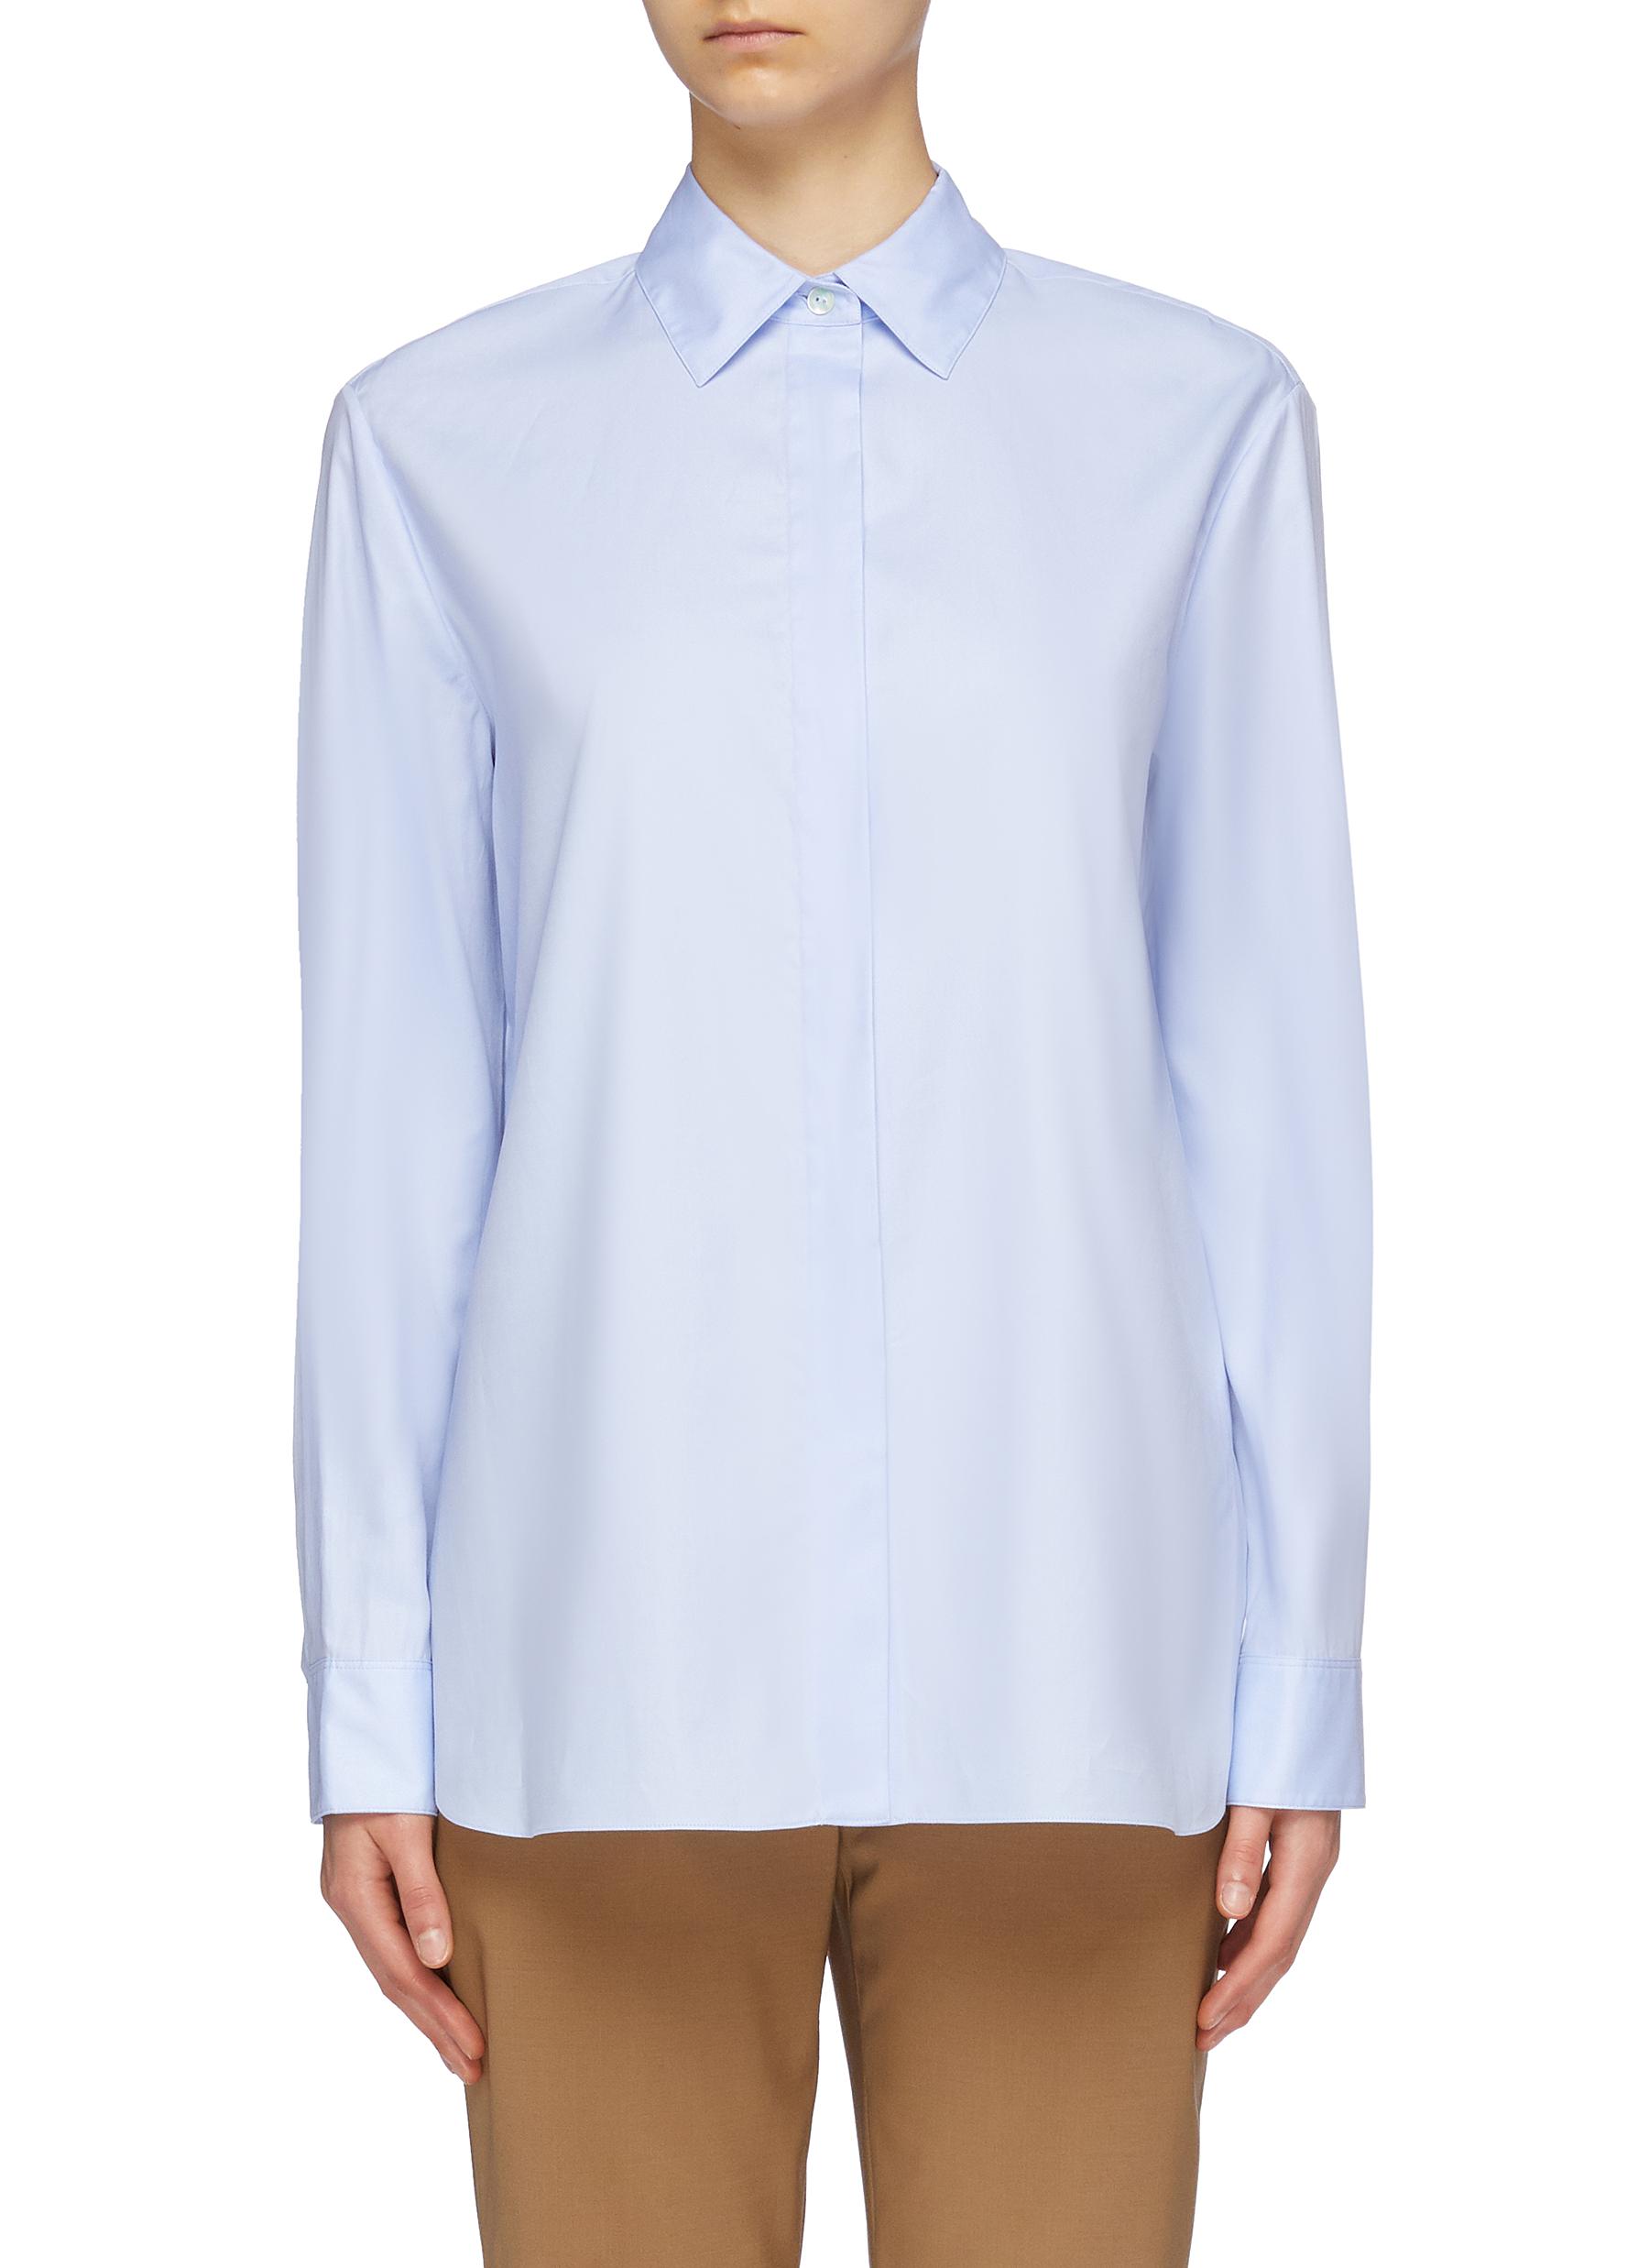 Classic twill shirt by Theory